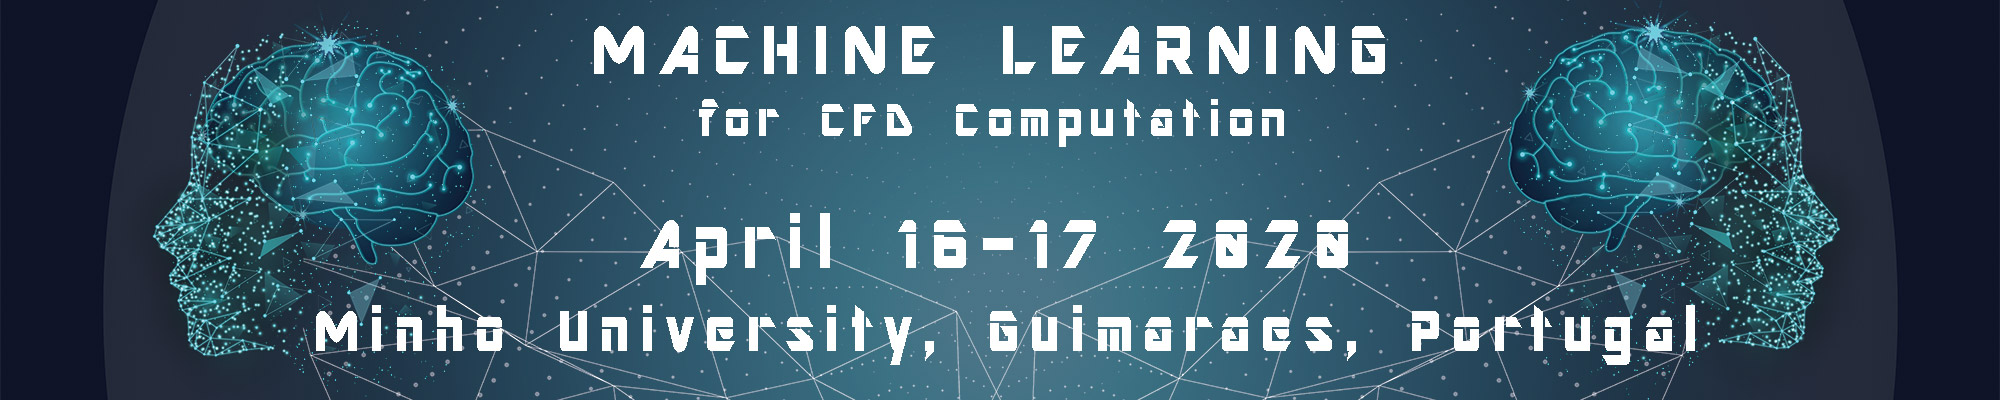 Machine Learning 2020 Header for conference, in april 16-17, in Minho, Portugal